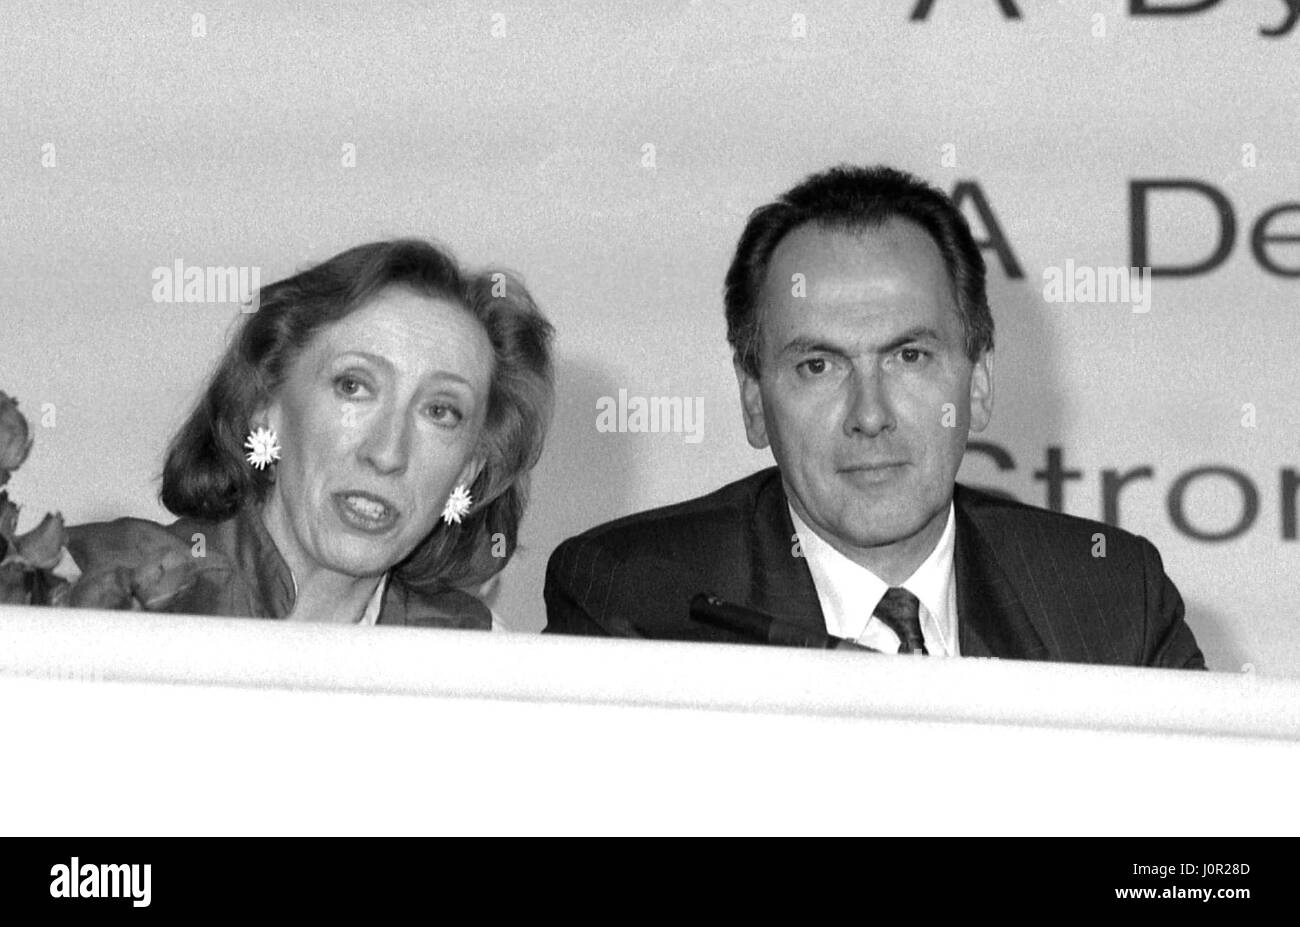 Margaret Beckett (left), Shadow Chief Secretary to the Treasury and Dr. Jack Cunningham, Shadow Leader of the House of Commons, attend a Labour party policy launch press conference in London, England on May 24, 1990. Stock Photo